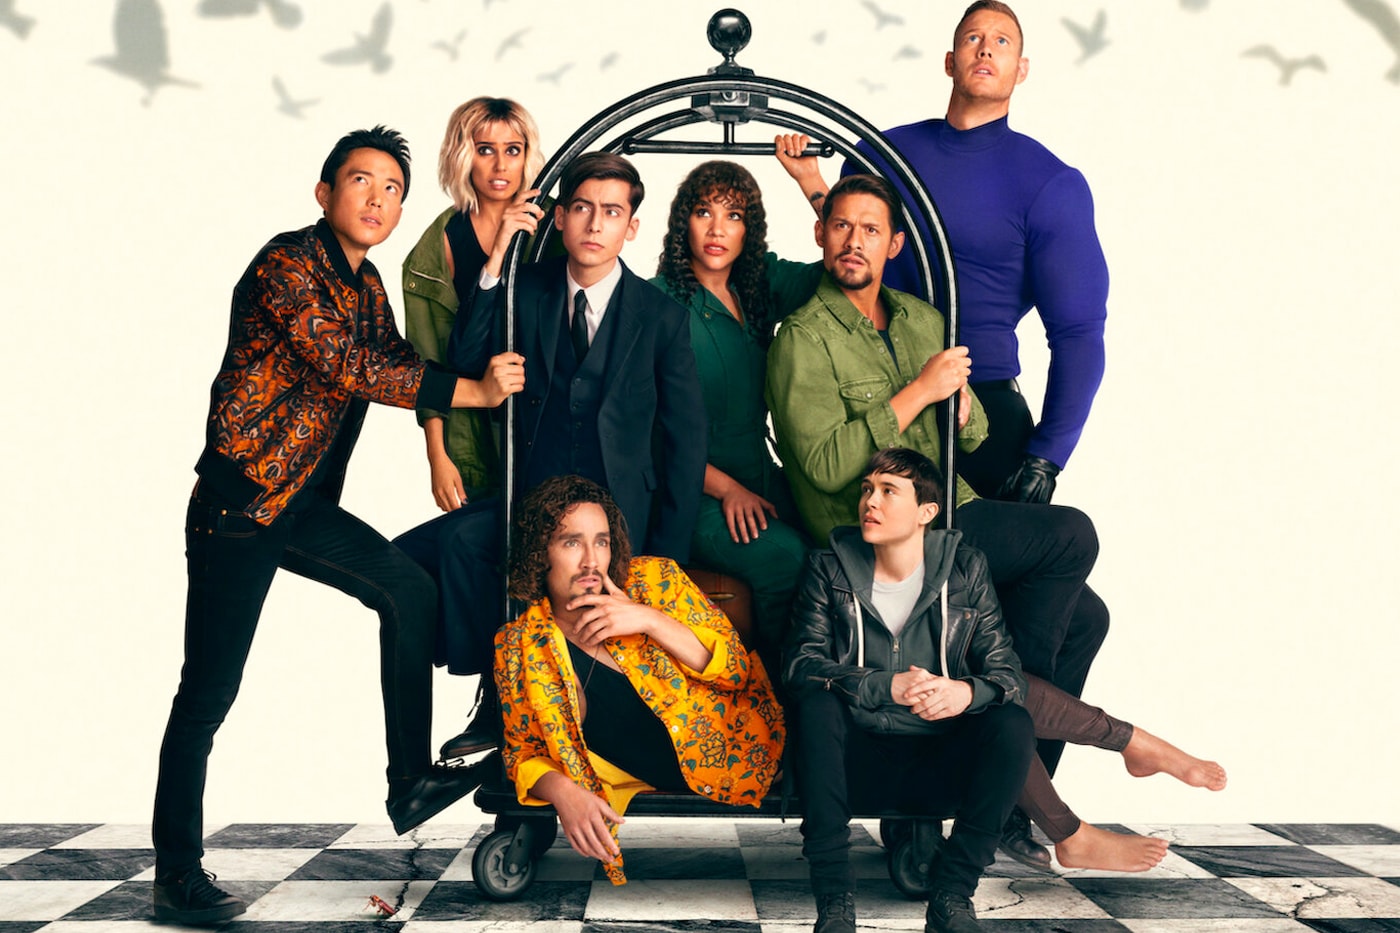 'The Umbrella Academy' Renewed for Fourth and Final Season